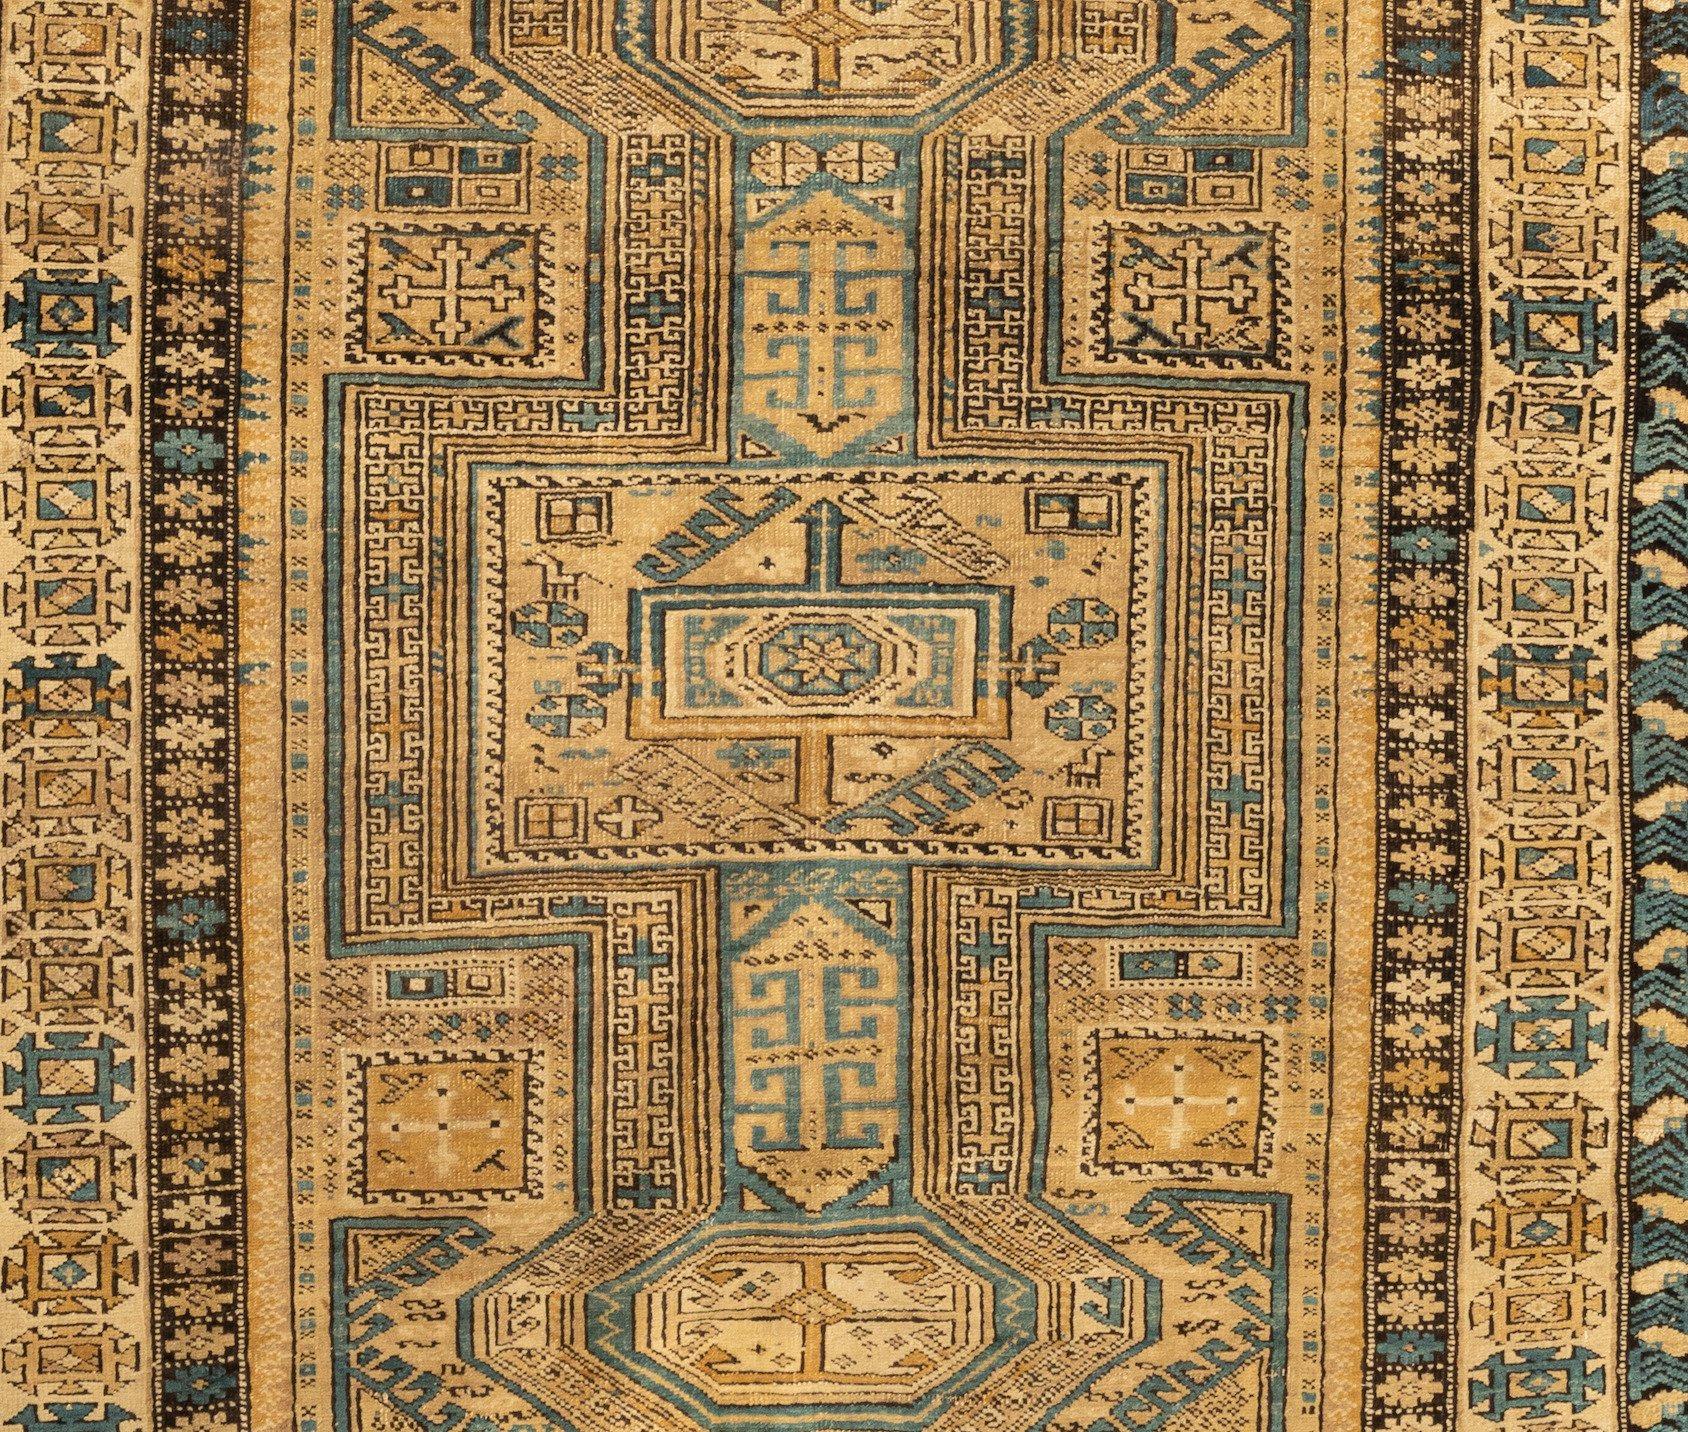 The Caucasian rugs get their name from the area in which they were made – the Caucasus. The Caucasus is a region that produces distinctive rugs since the dawn of civilization and in quantities from the 19th Century. The antique Caucasian rugs are